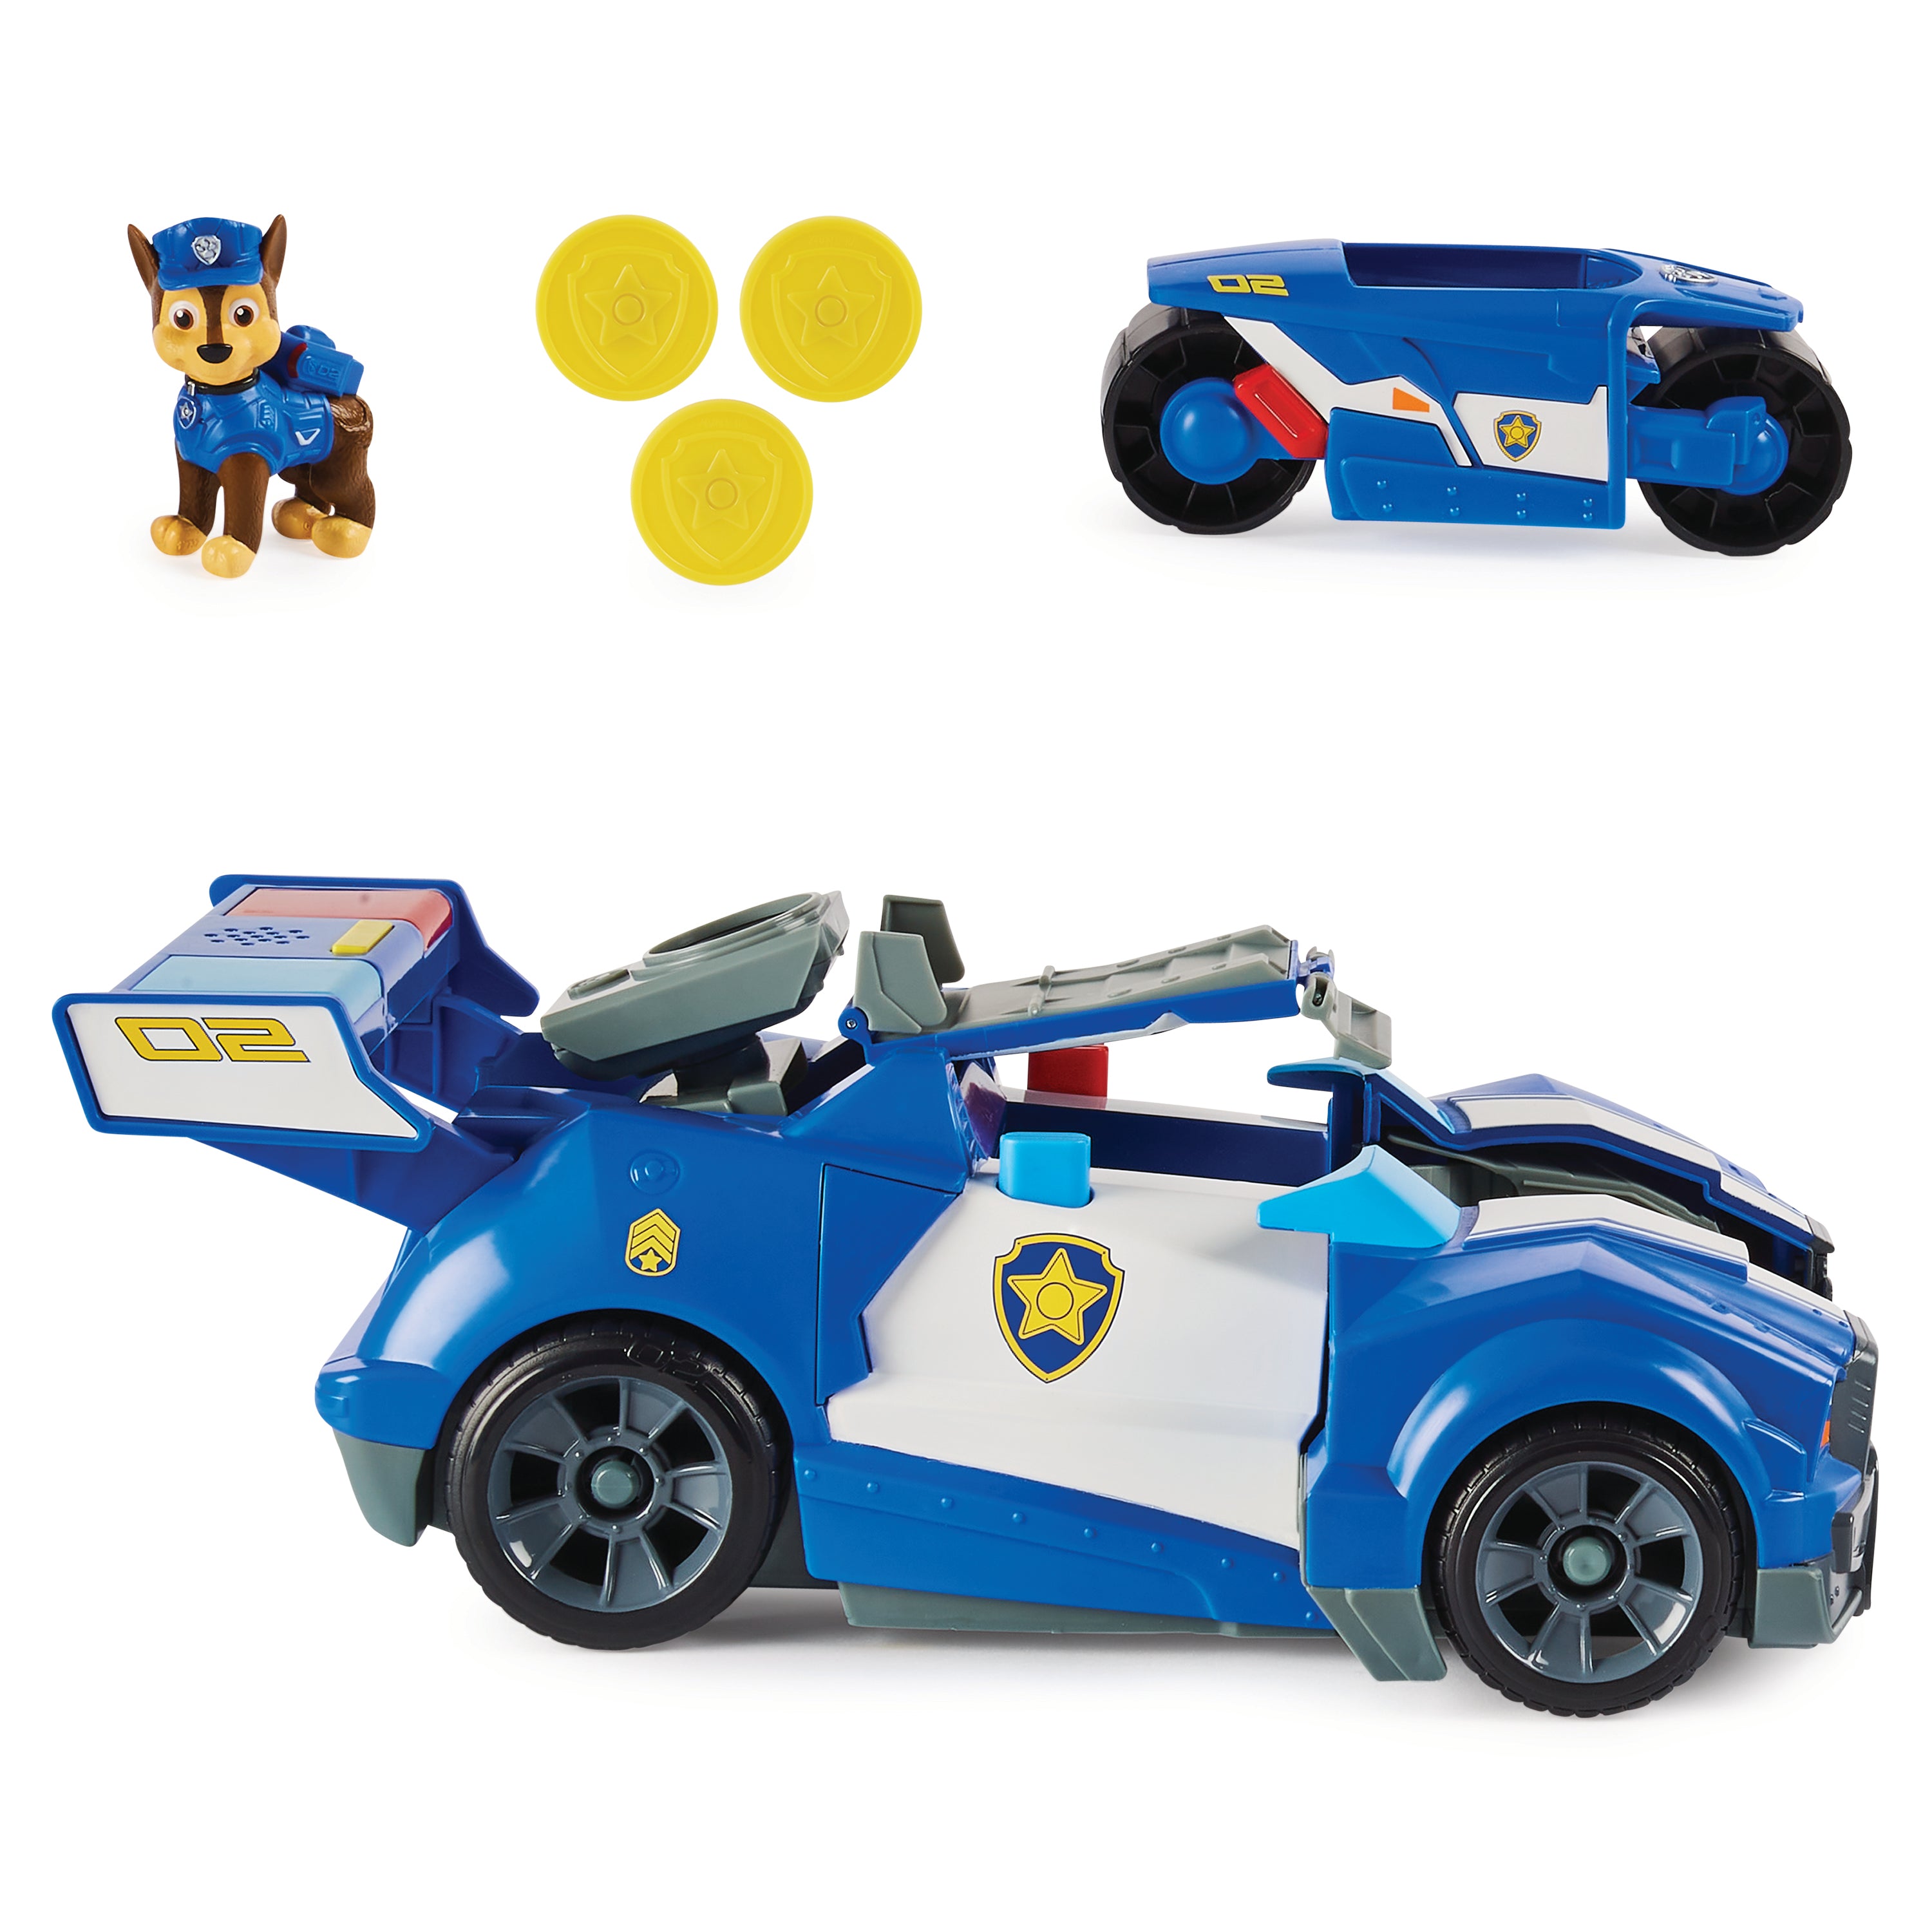 Paw Patrol: Paw Patrol La Pelicula Vehiculo Transformable - Chase